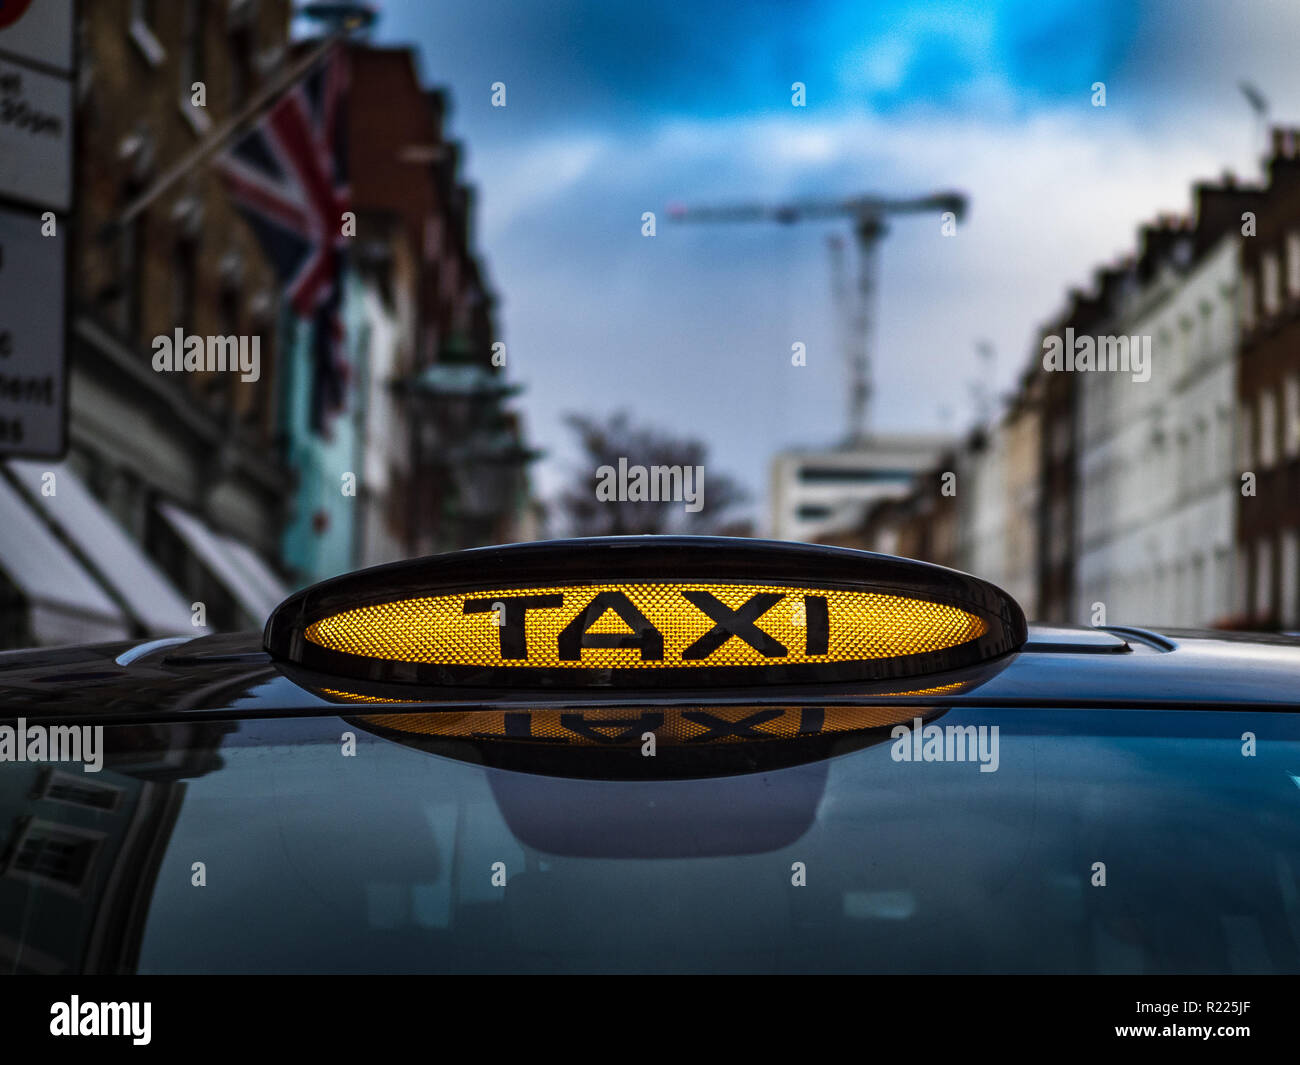 London Taxi Sign London Black Cab For Hire Sign Stock Photo